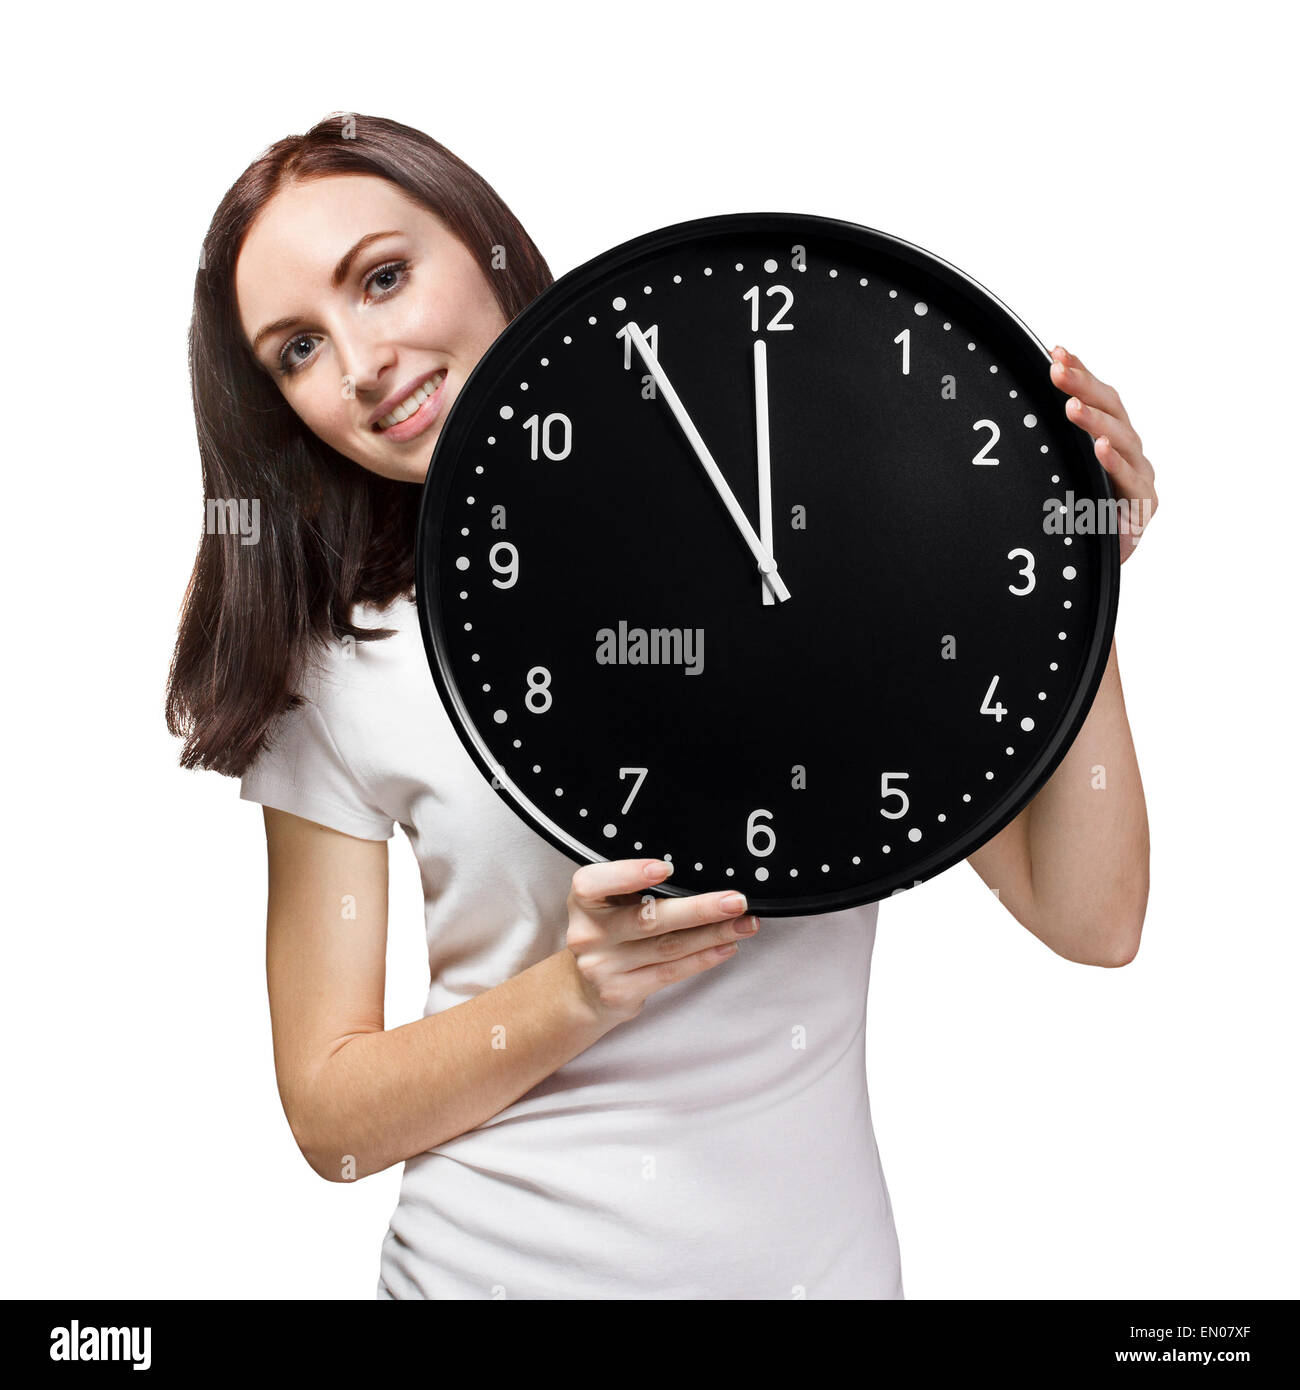 Woman holding an office clock Stock Photo